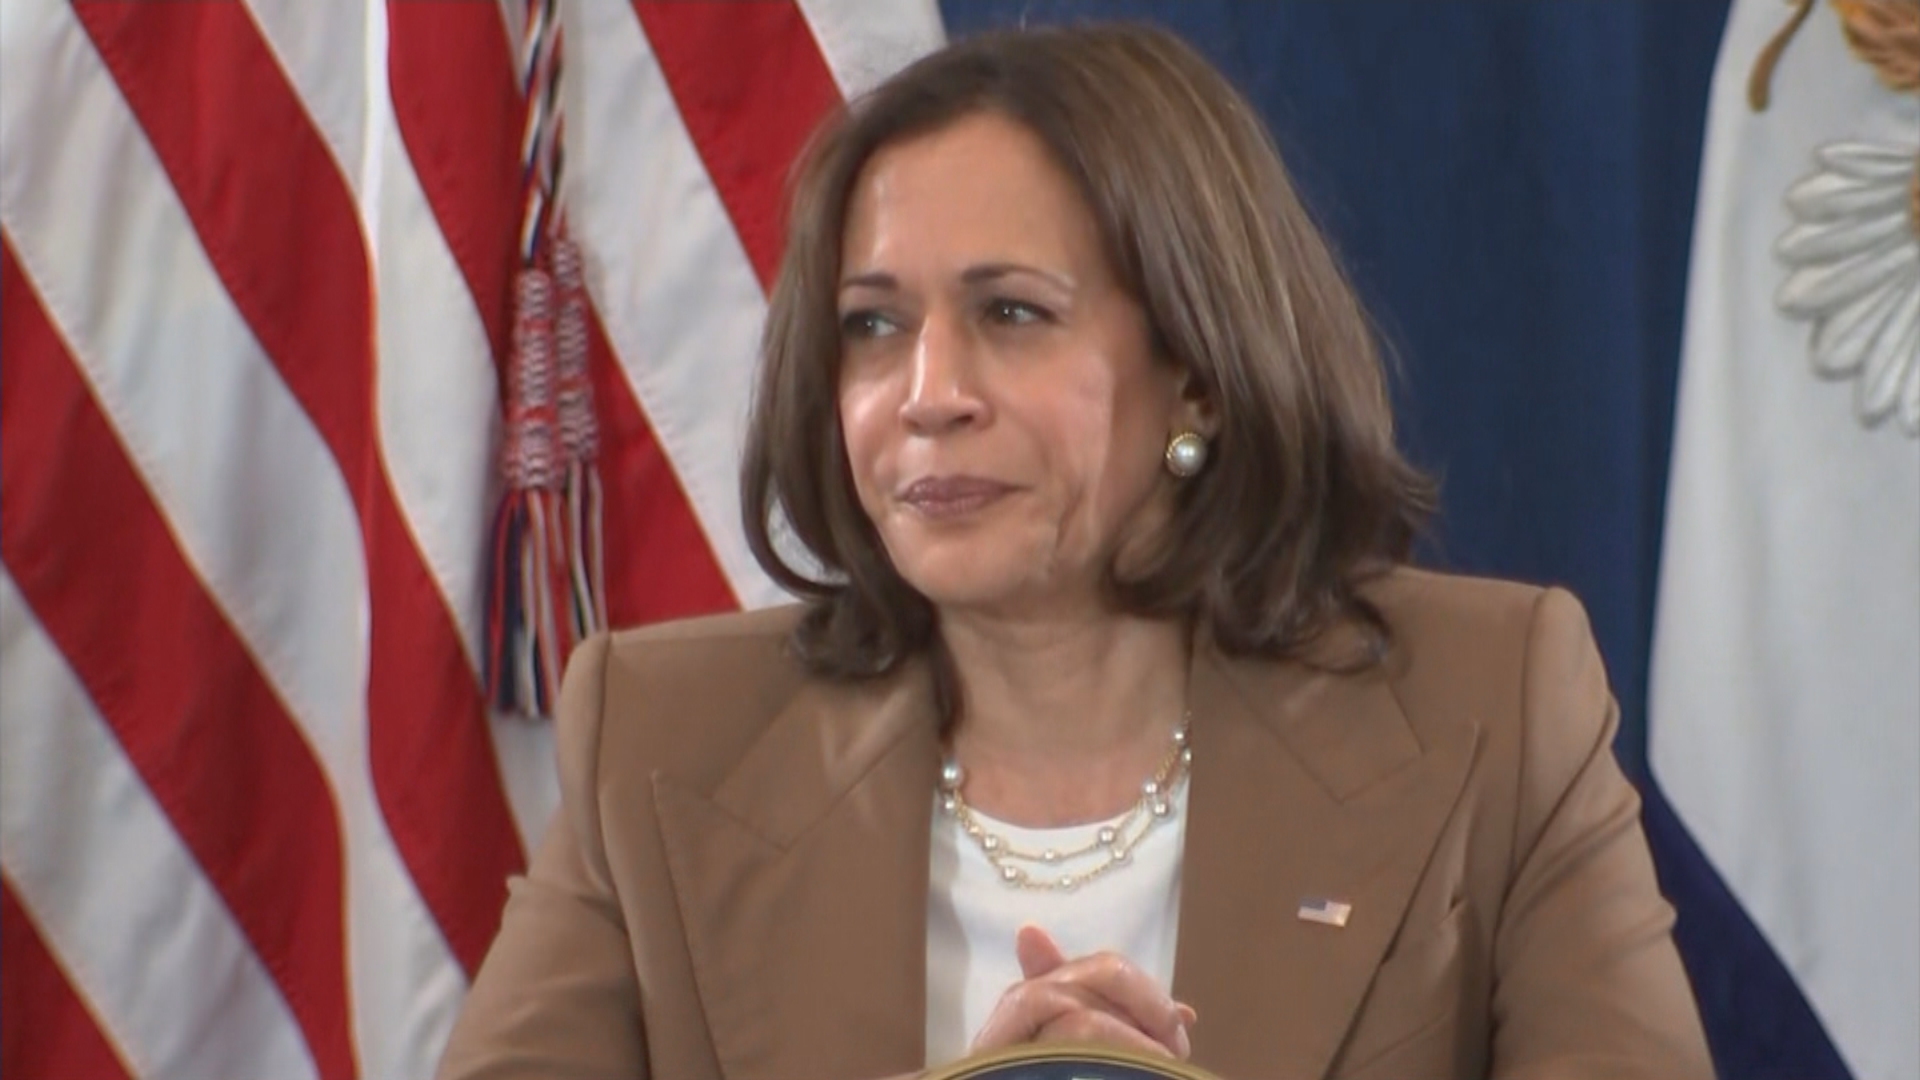 Vice President Kamala Harris To Speak At 113th Annual NAACP Convention In Atlantic City